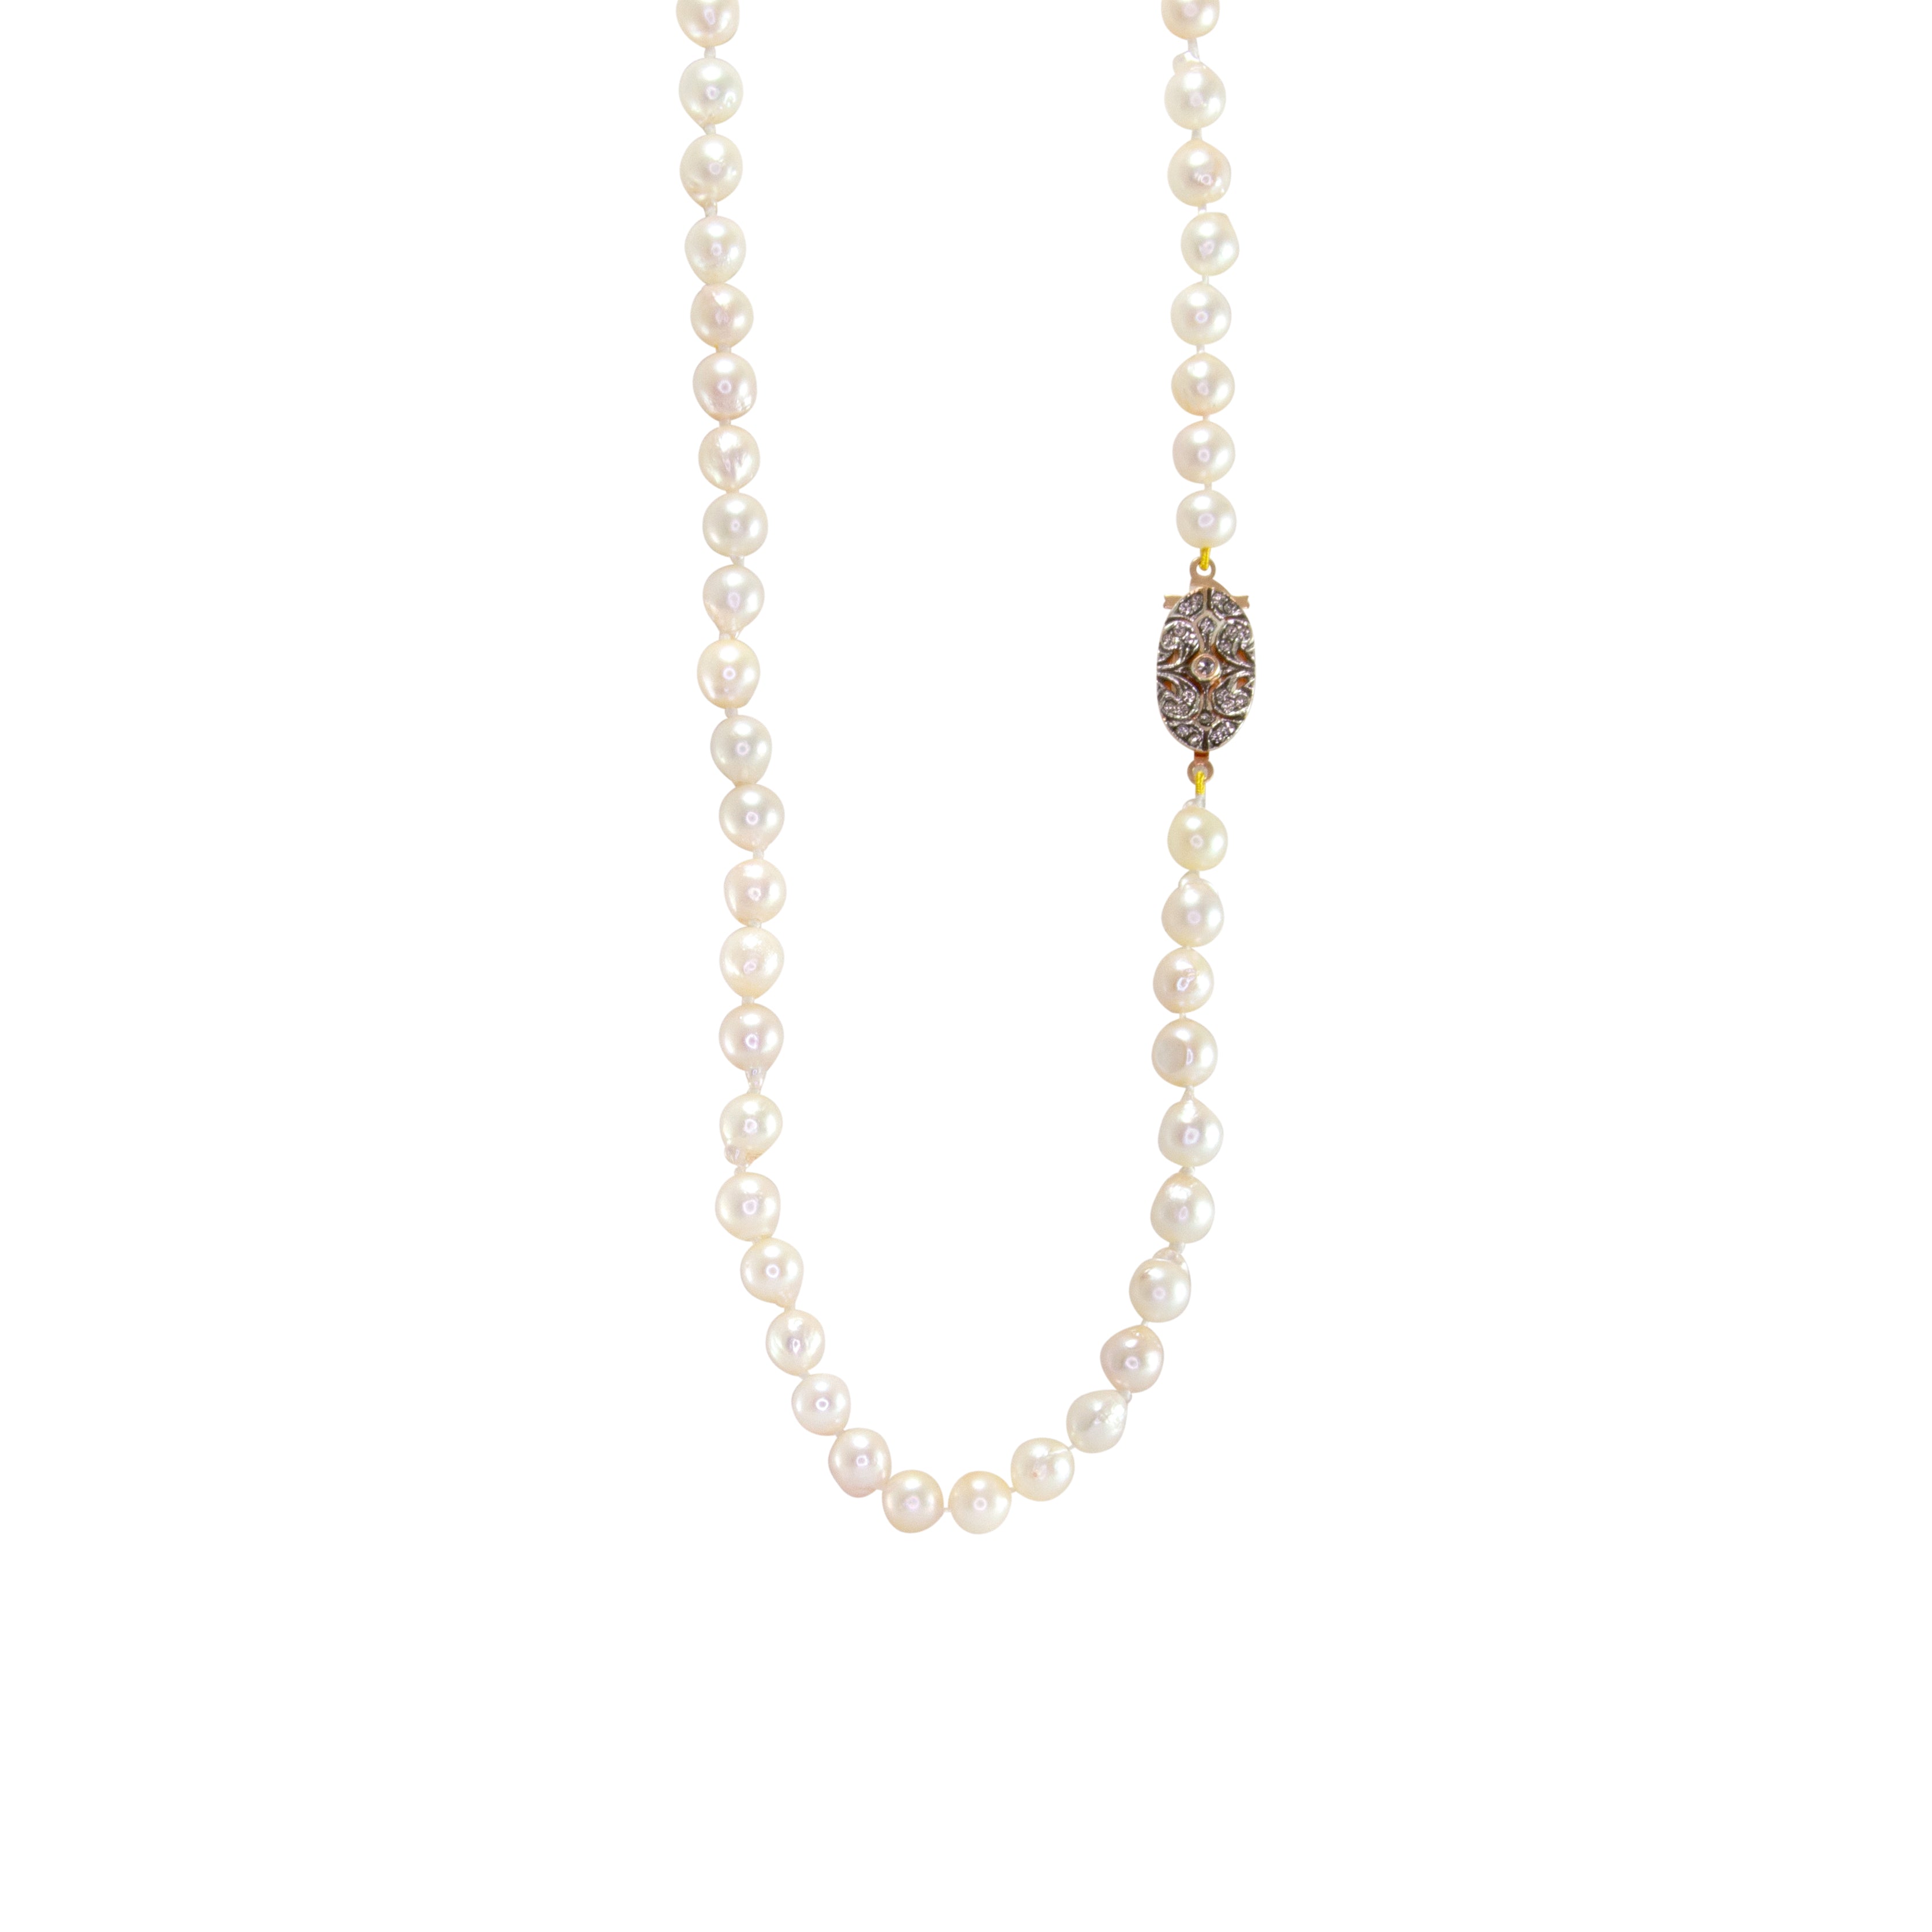 7mm White Pearl Necklace 24" with Clasp